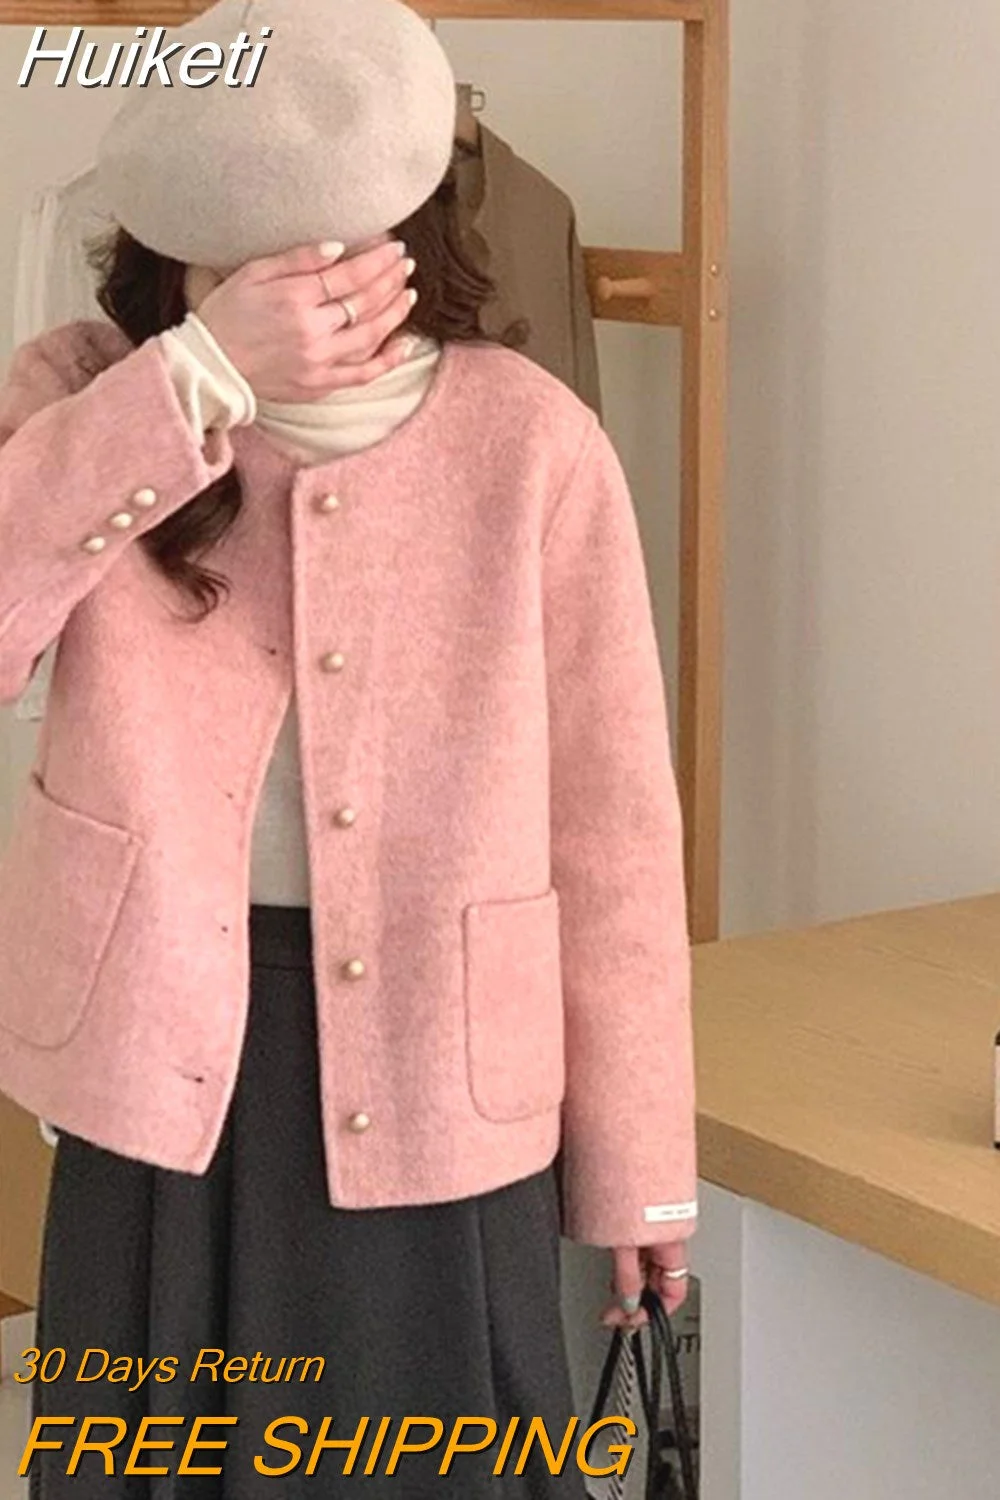 Huiketi French Elegant Pink Tweed Jacket Women Sweet Long Sleeve Casual Coat Fashion O Neck Buttons All Match Female Chic Outwear